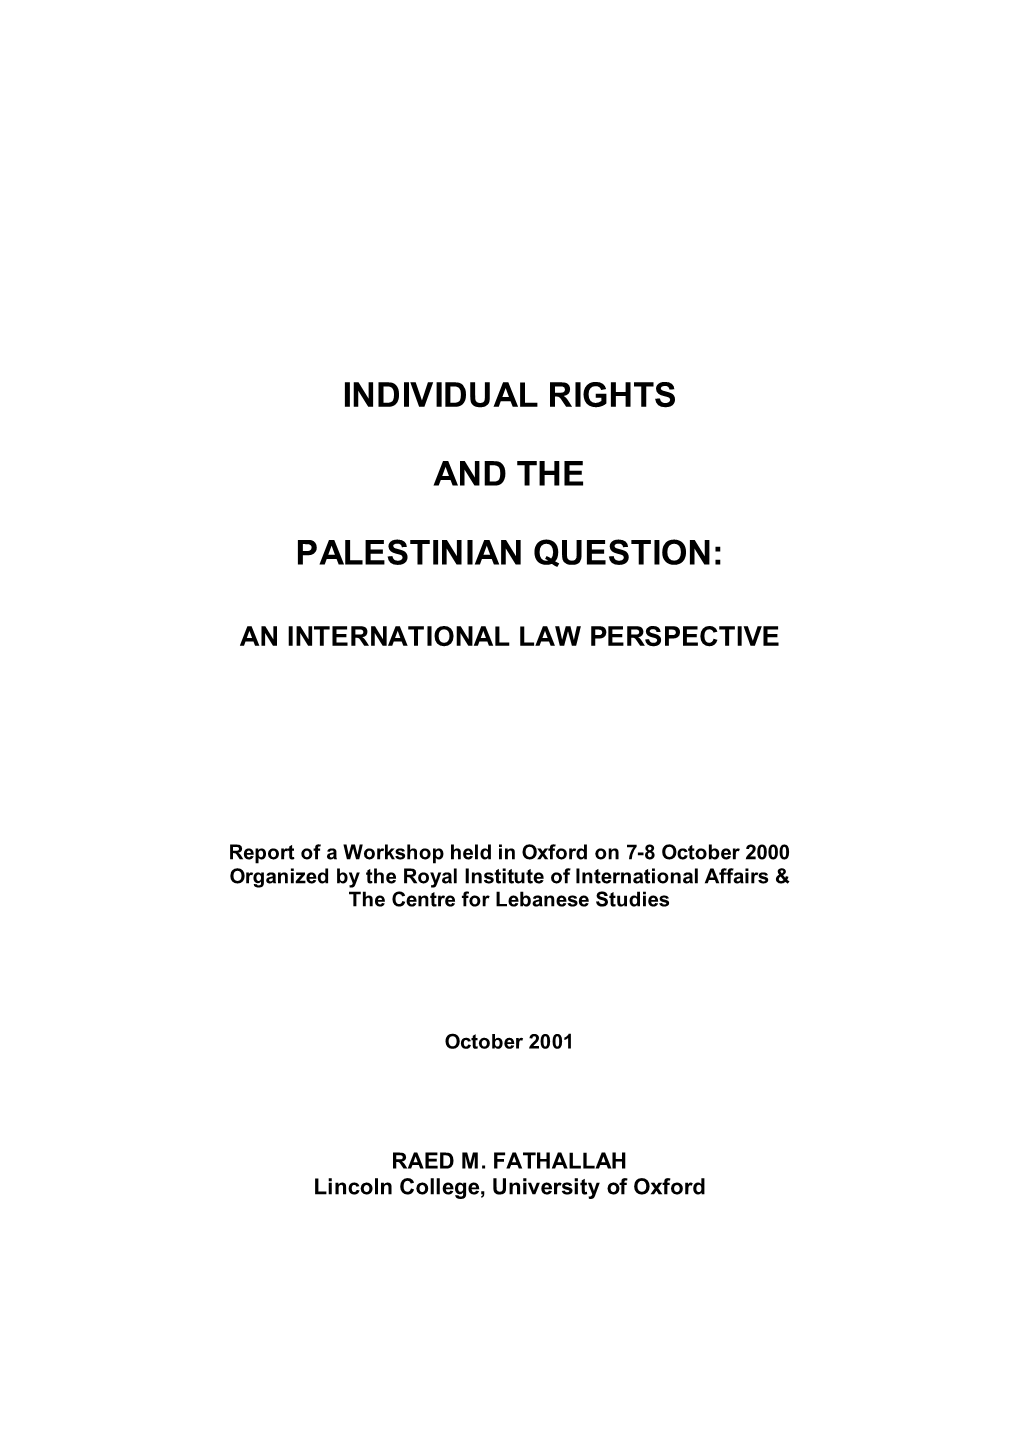 Individual Rights and the Palestinian Question